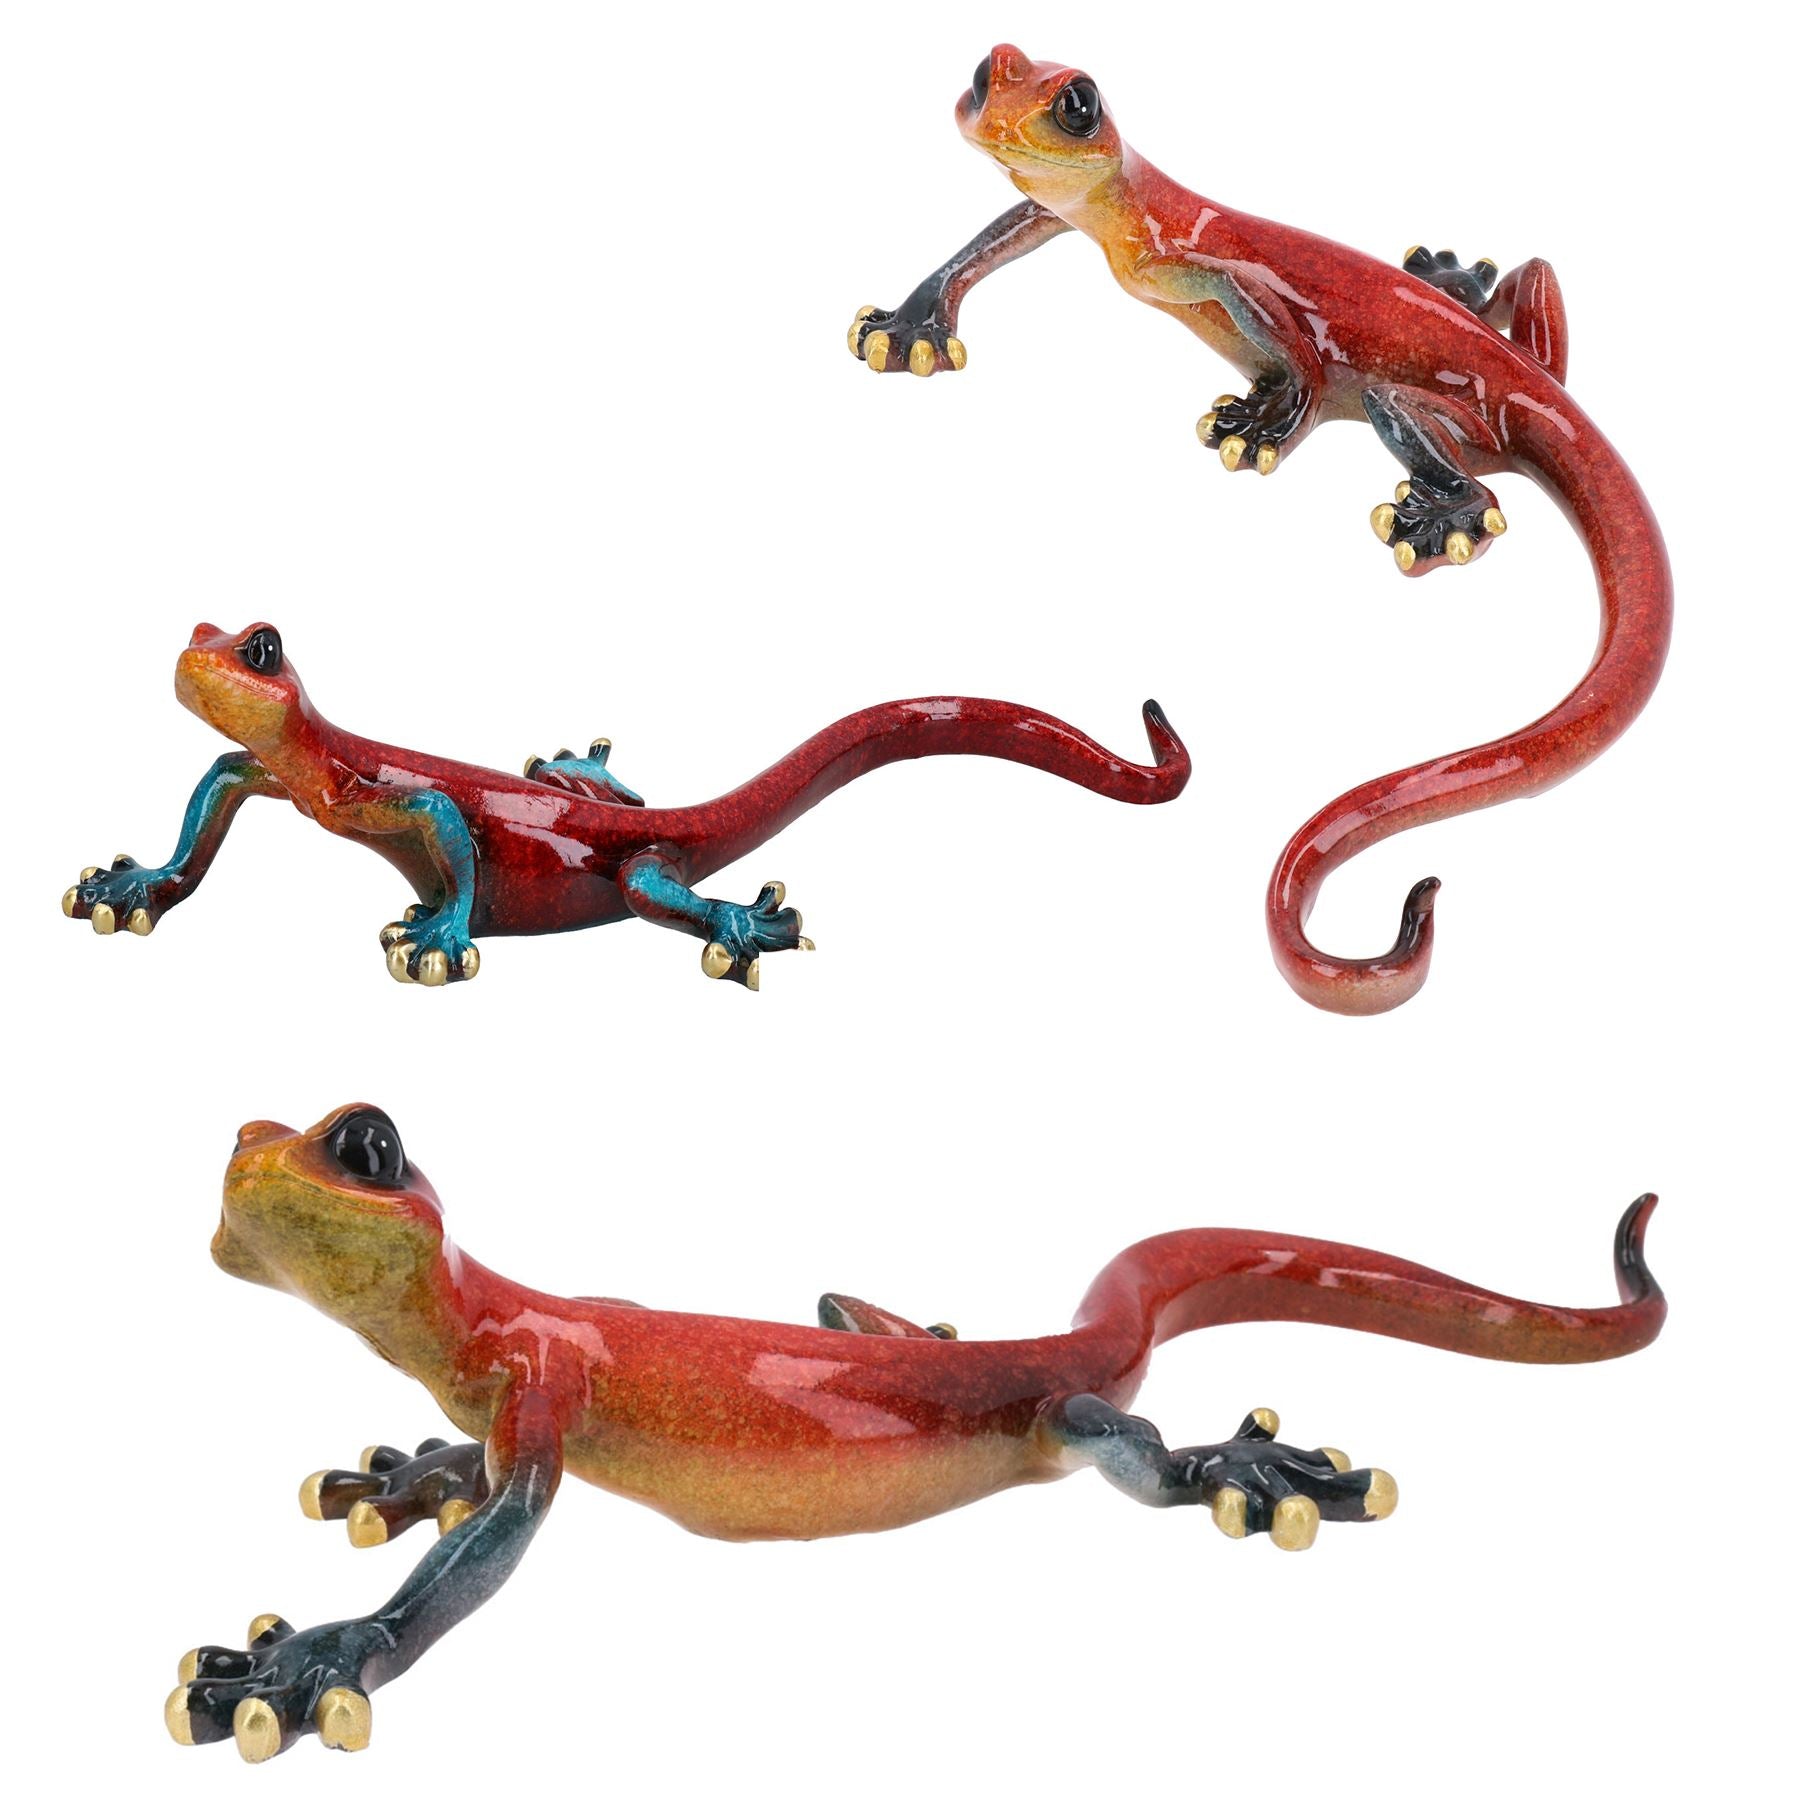 Red Speckled Gecko Lizard Resin Wall Shed Sculpture Decor Statue Full Set